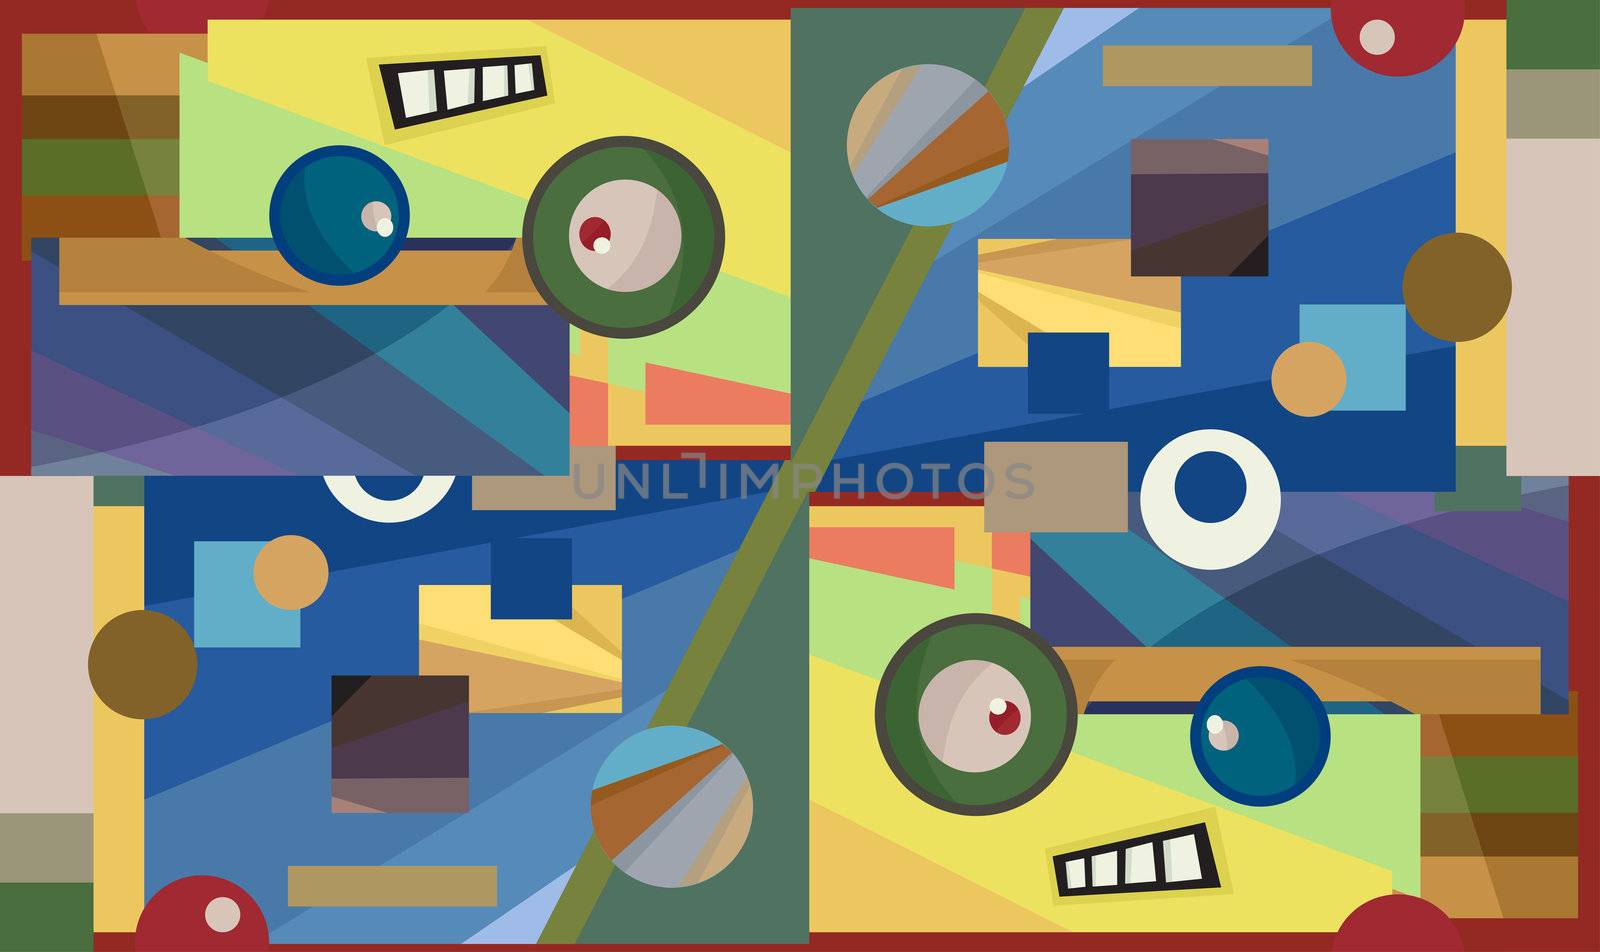 Abstract rectangles and circles with a cute face